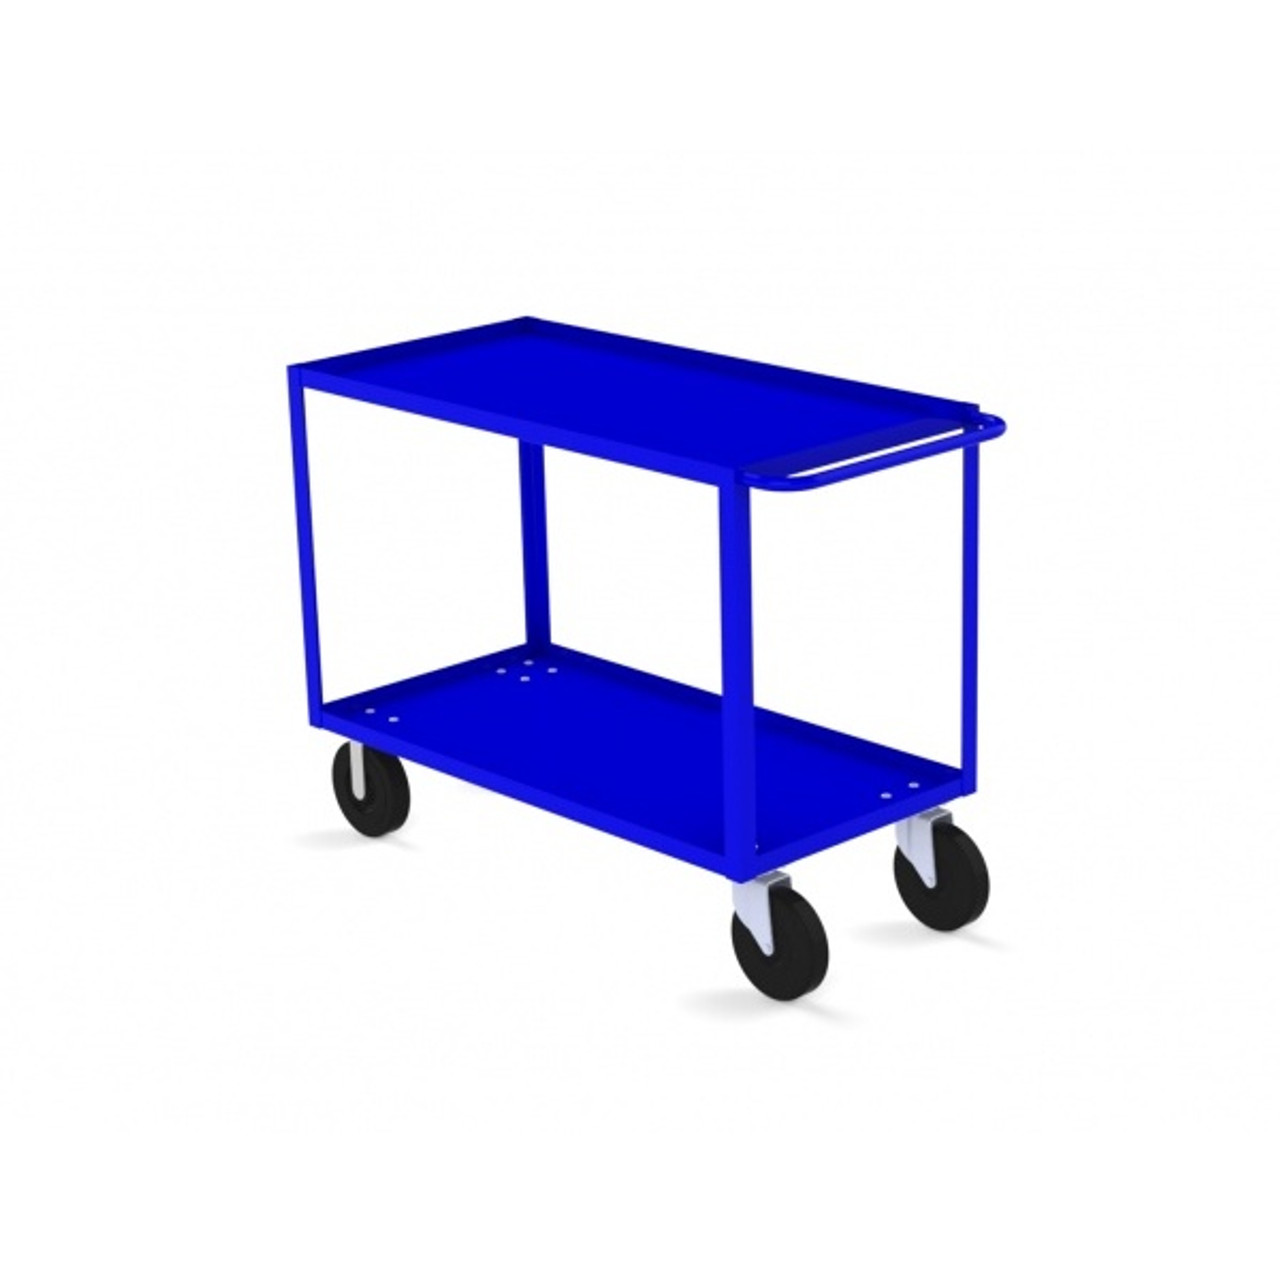 Valley Craft Two Shelf 30 x 60" Utility Cart, Blue with Mold On Casters(CALL FOR BEST PRICING)